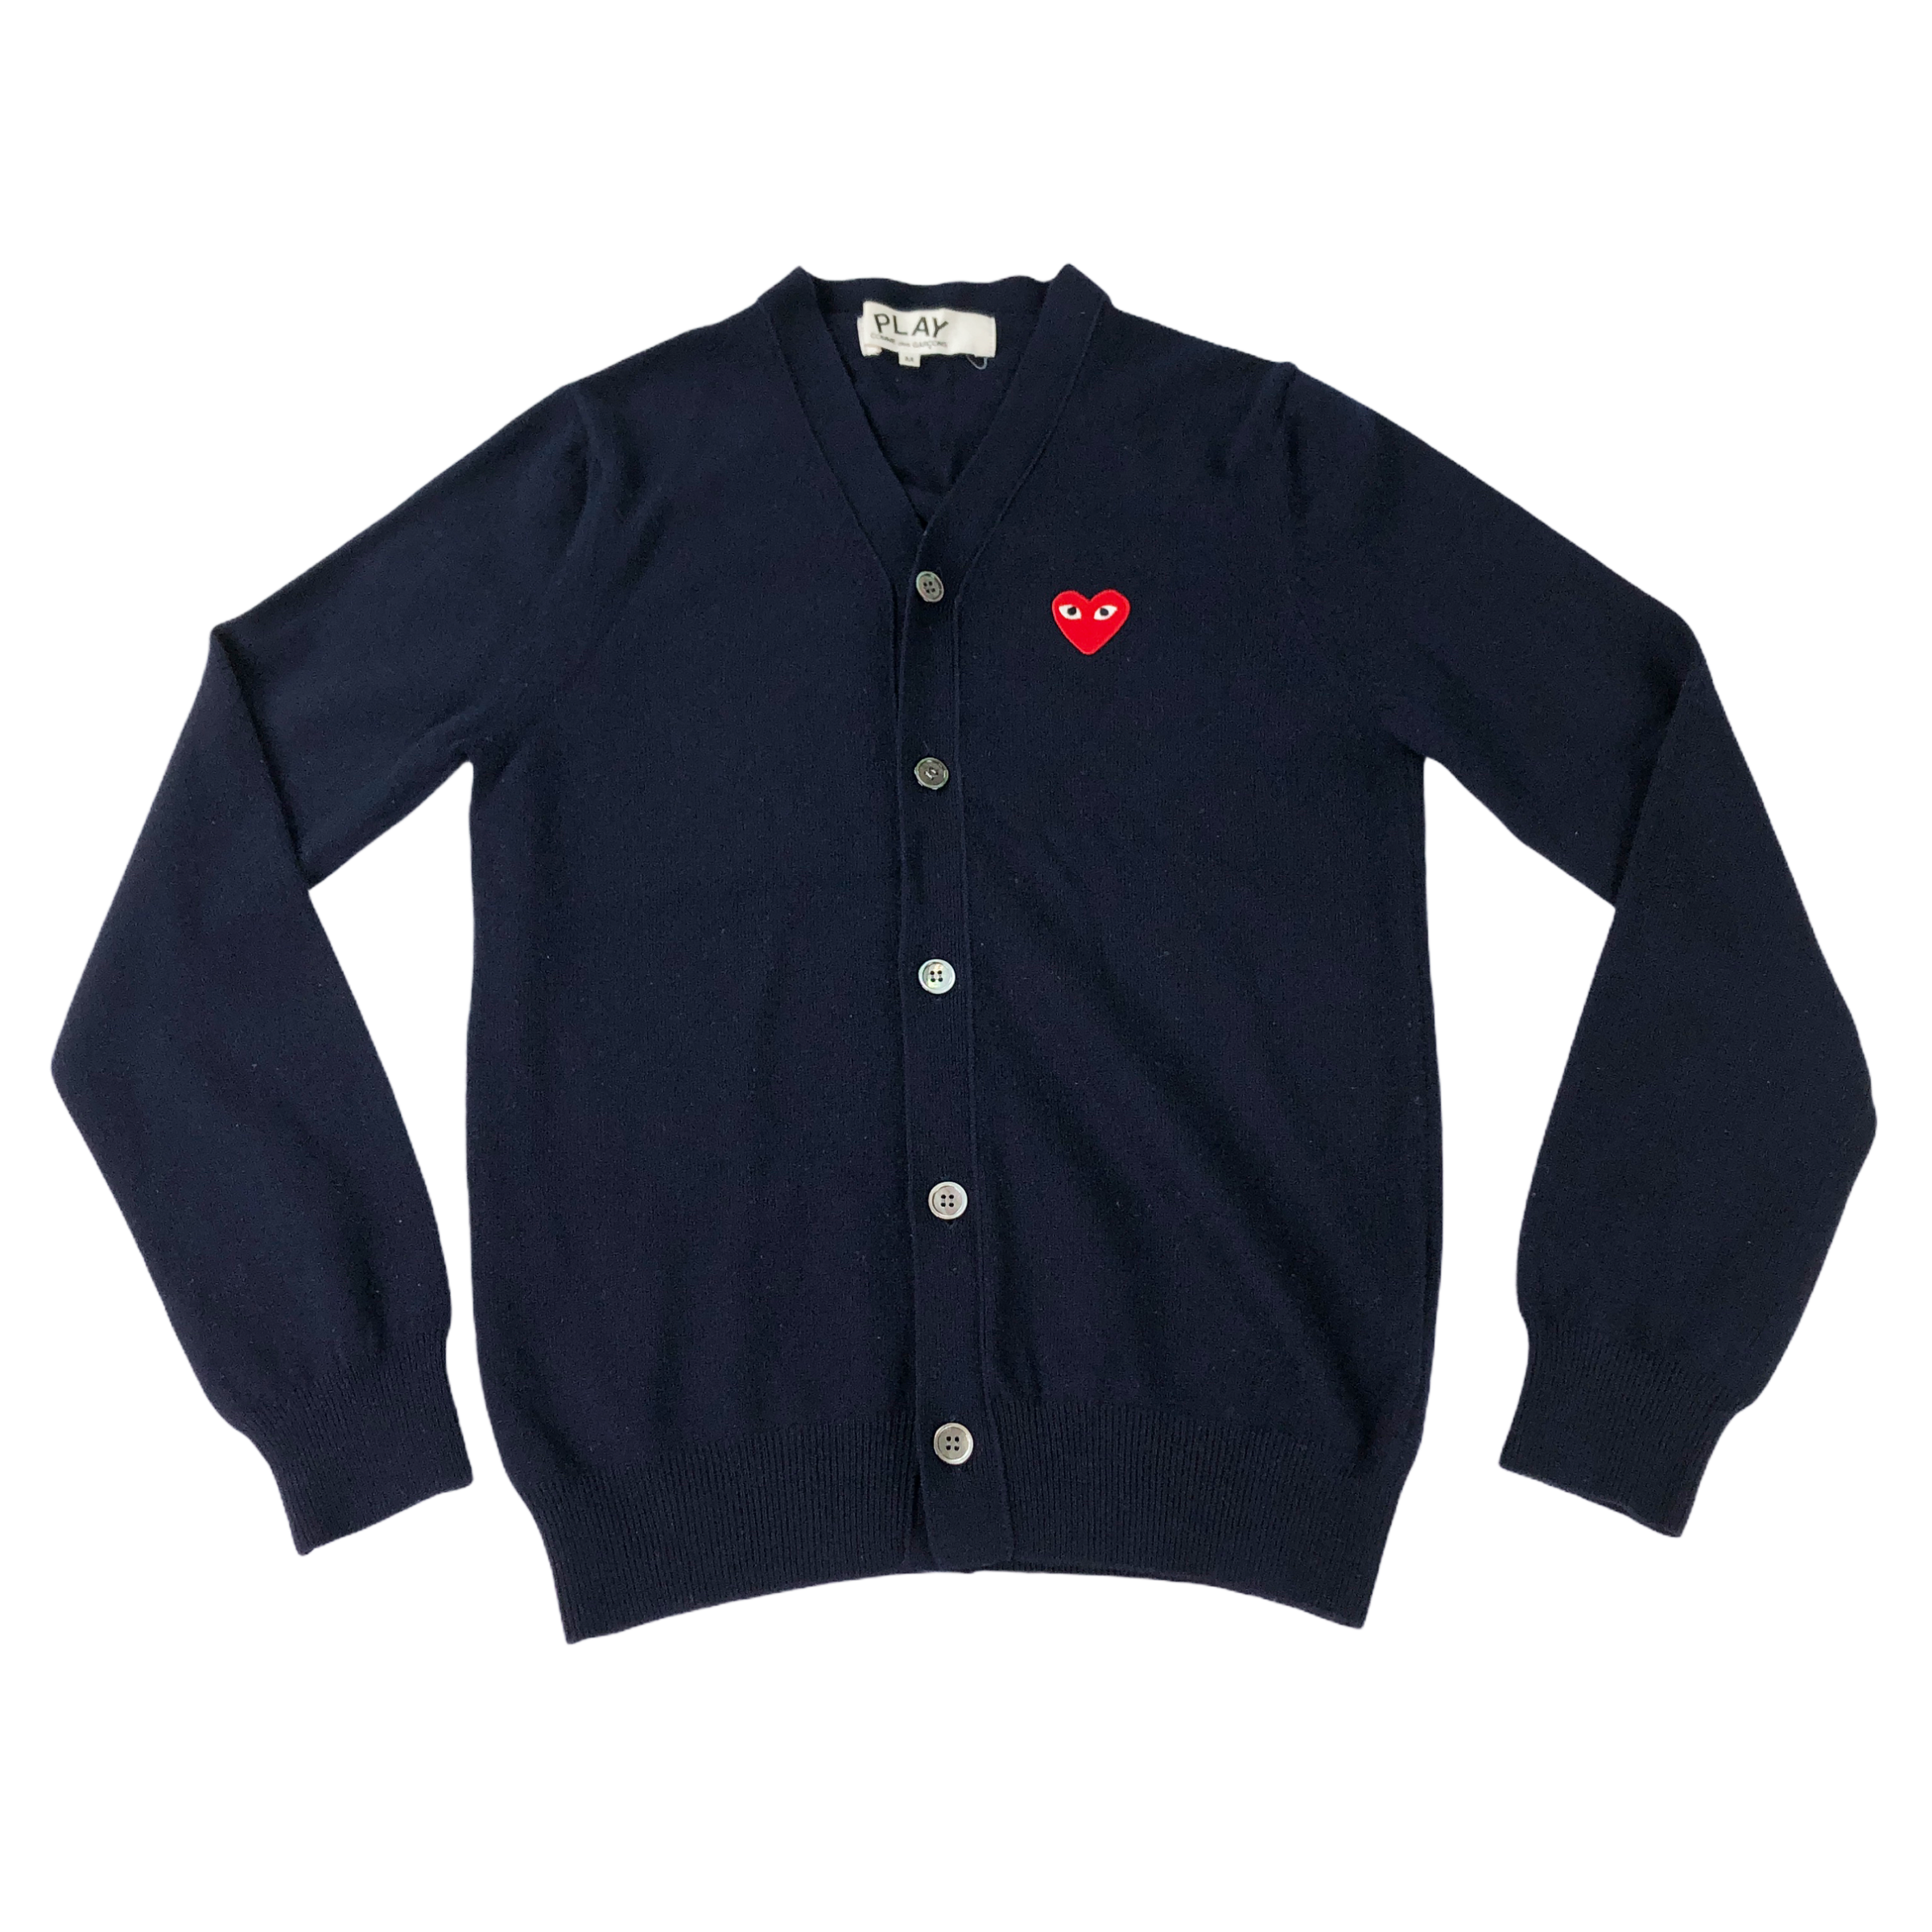 [Comme Des Garcons] PLAY Navy Cardigan 2 - Size M